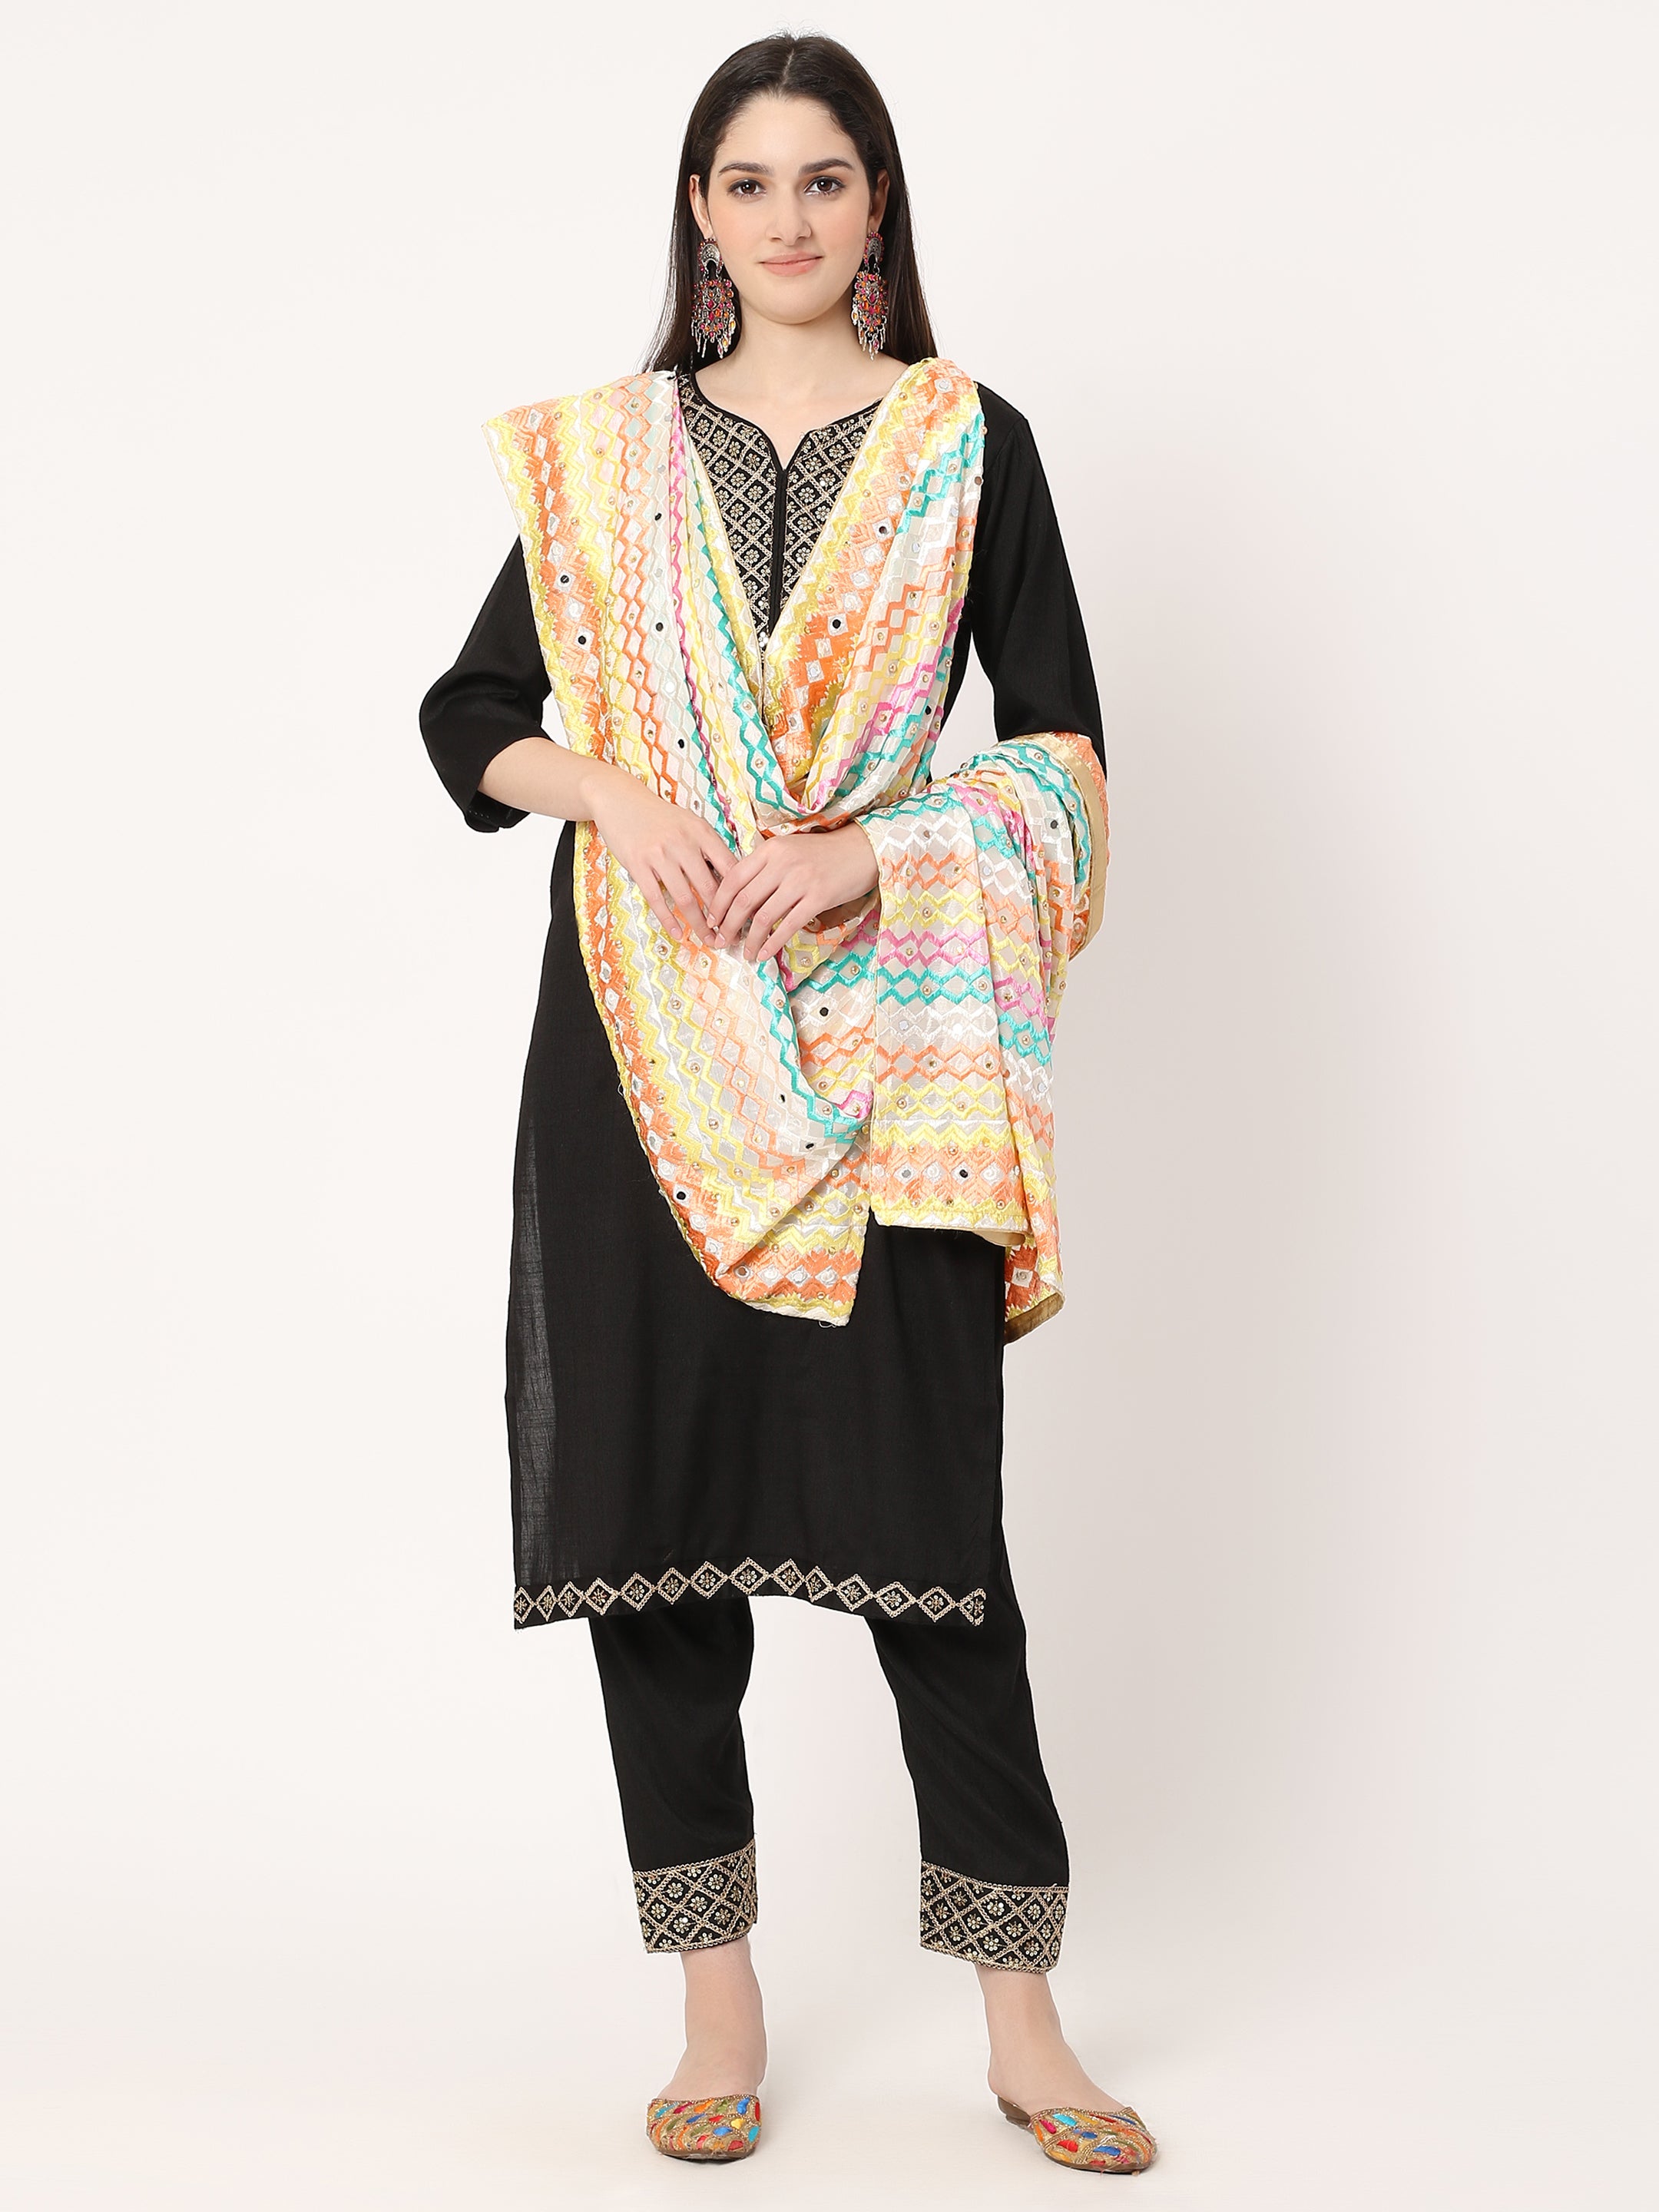 off-white-multicolour-embroidery-phulkari-dupatta-with-beads-and-pearl-mcrcpd0204-moda-chales-4